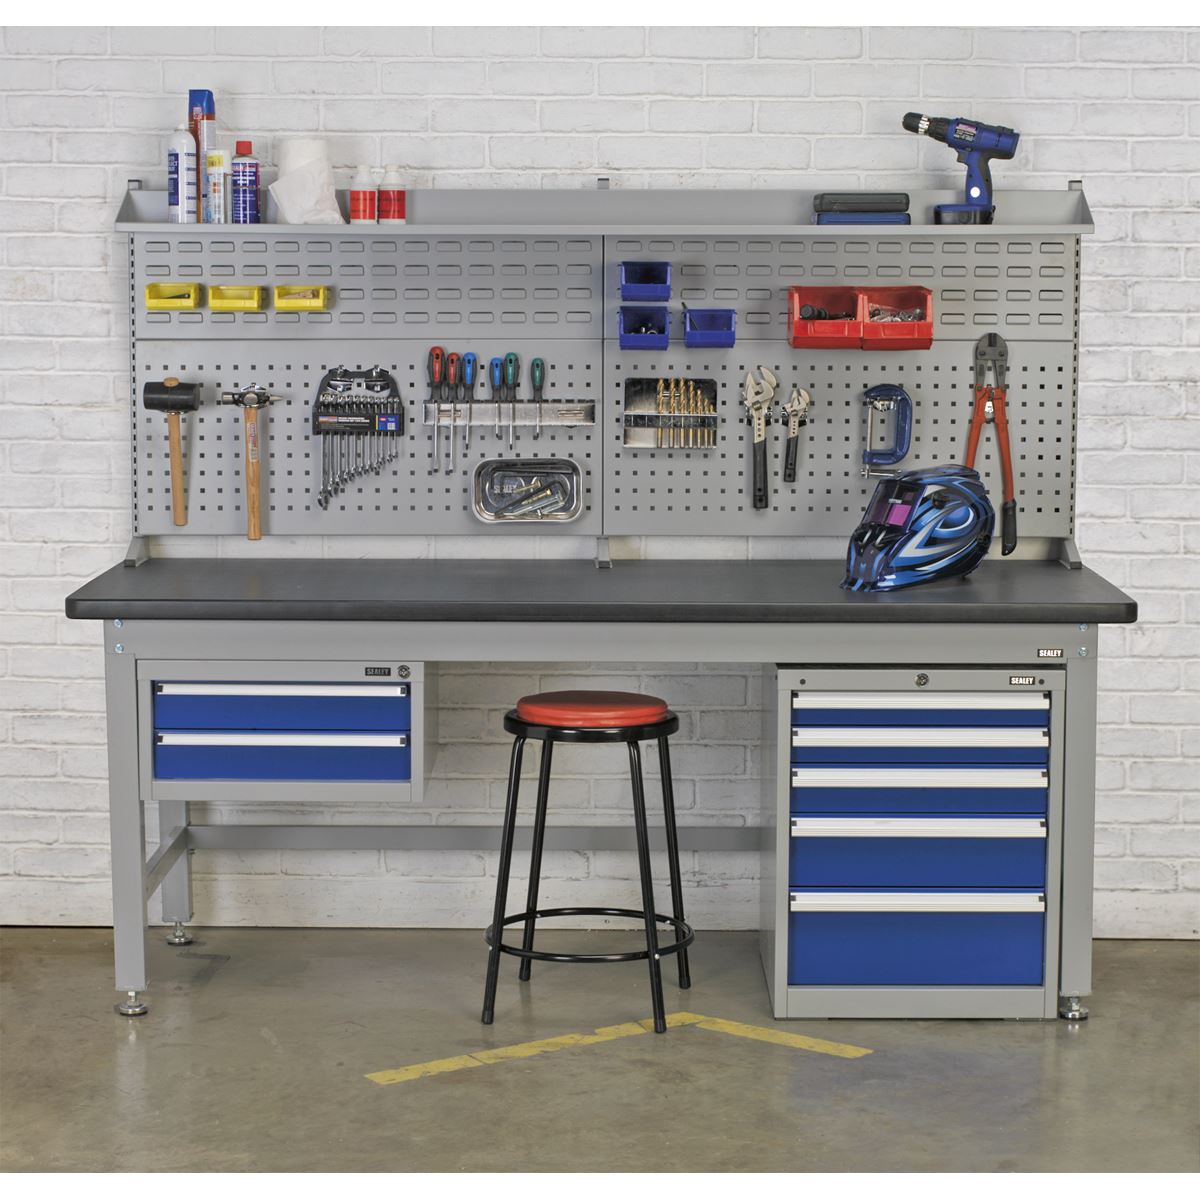 Sealey Premier Industrial Double Drawer Unit for API Series Workbenches